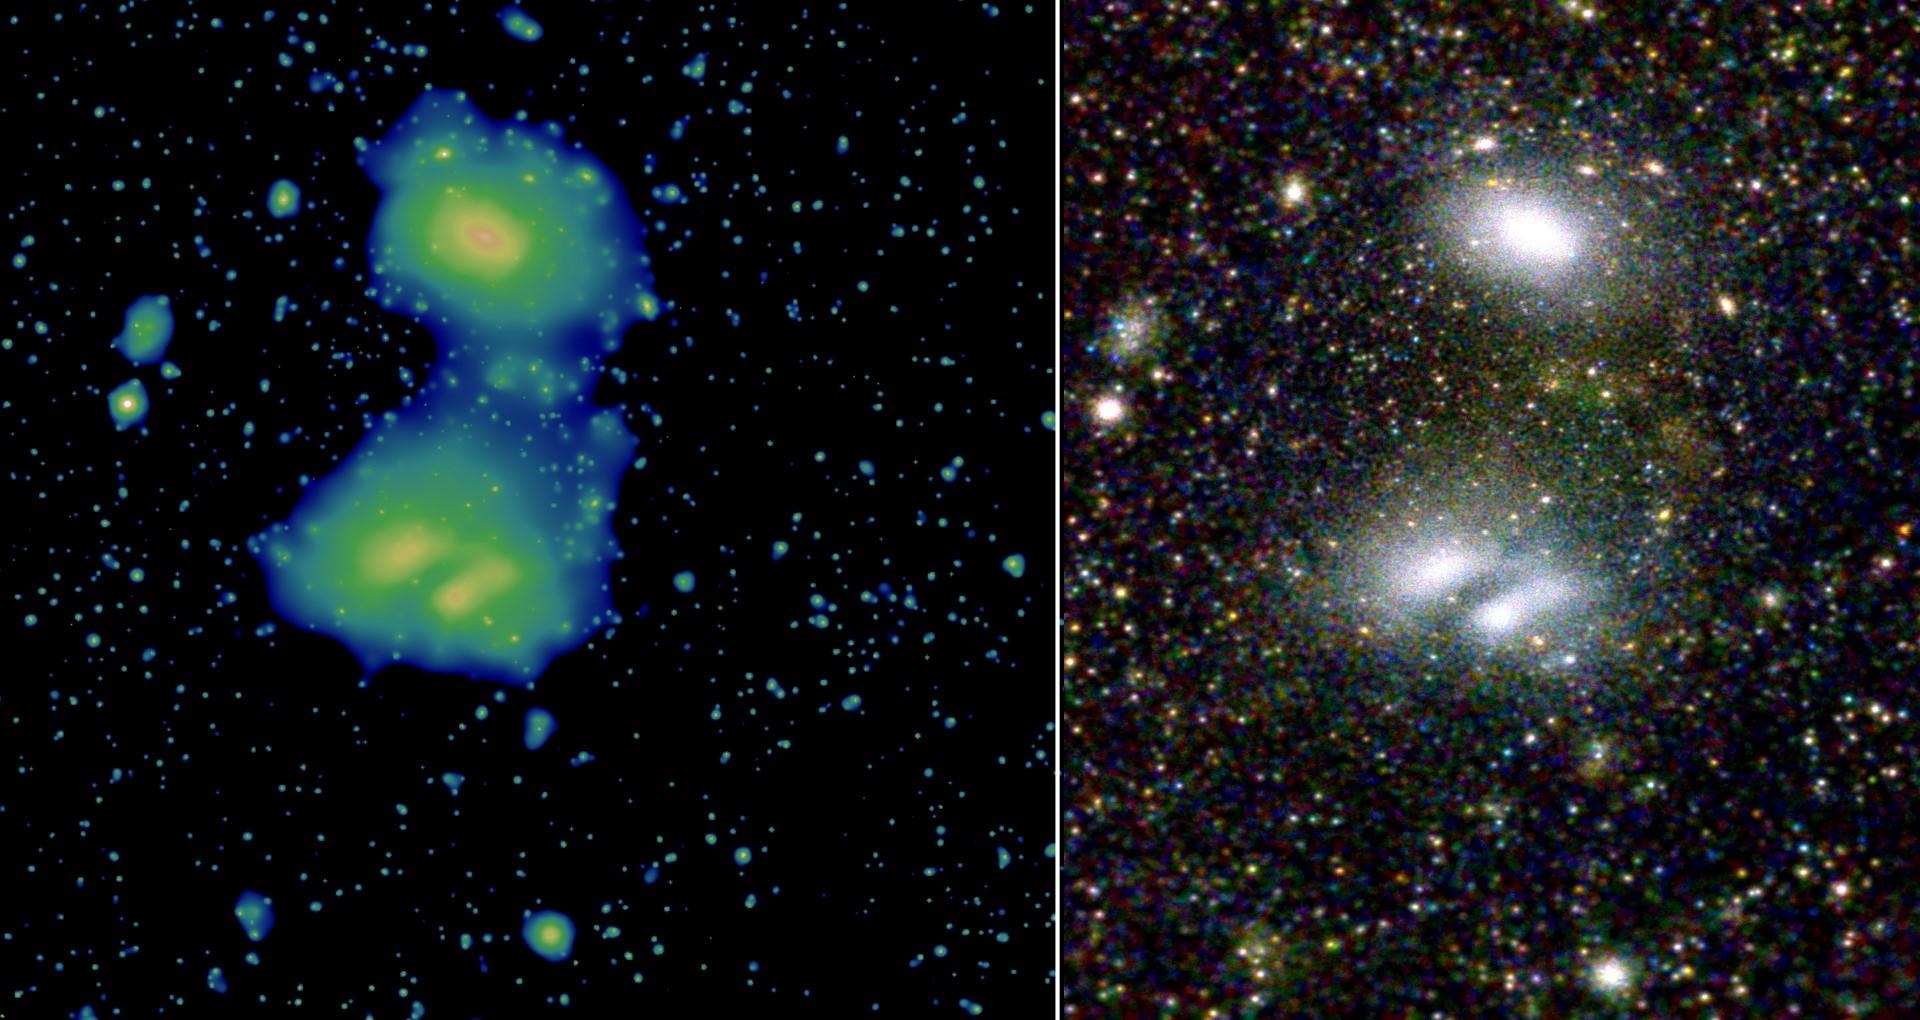 Two interacting galaxy clusters, A3391 and A3395